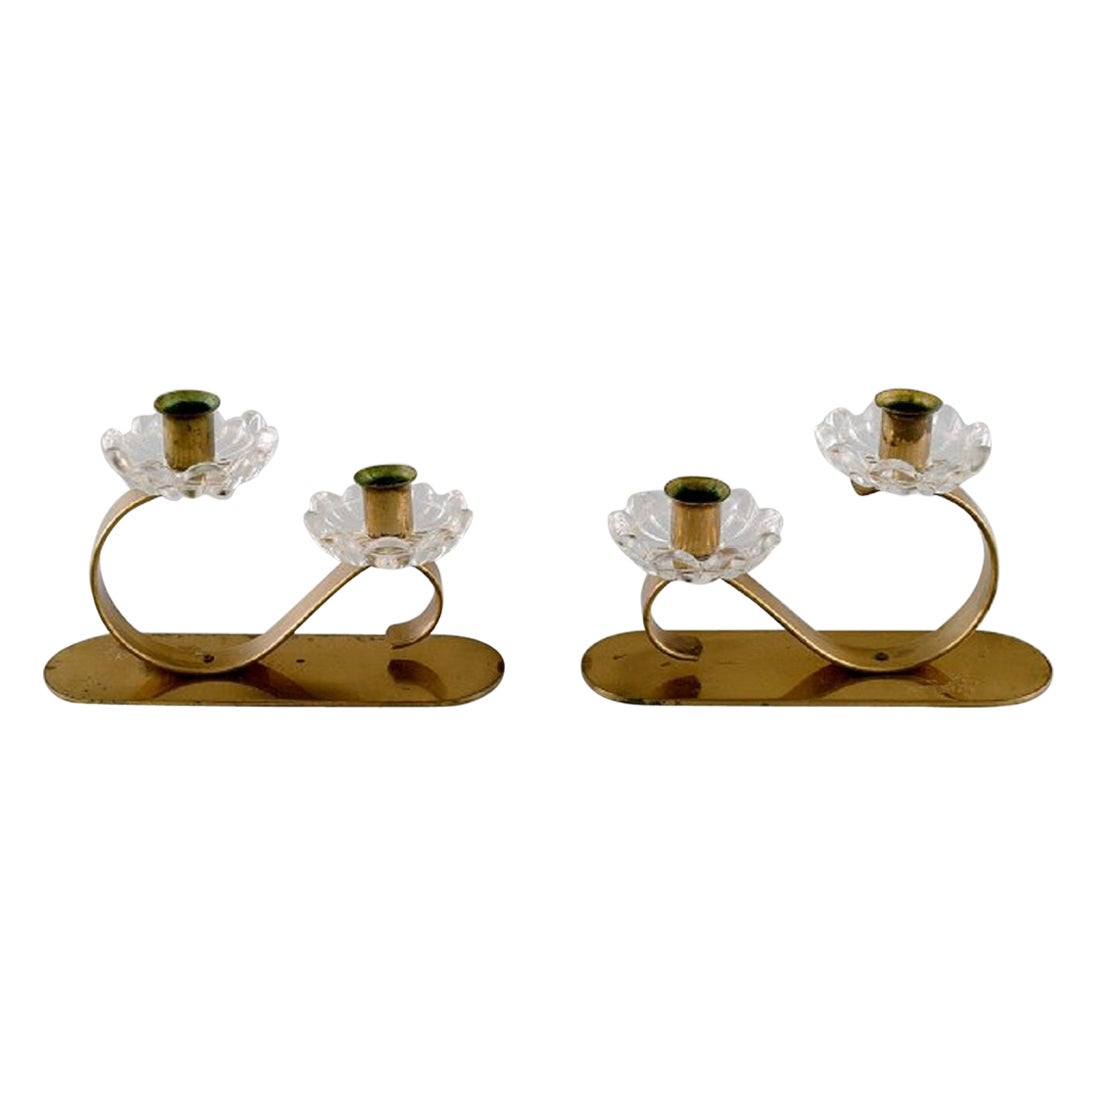 Gunnar Ander for Ystad Metall, Two Candlesticks in Brass and Clear Art Glass For Sale